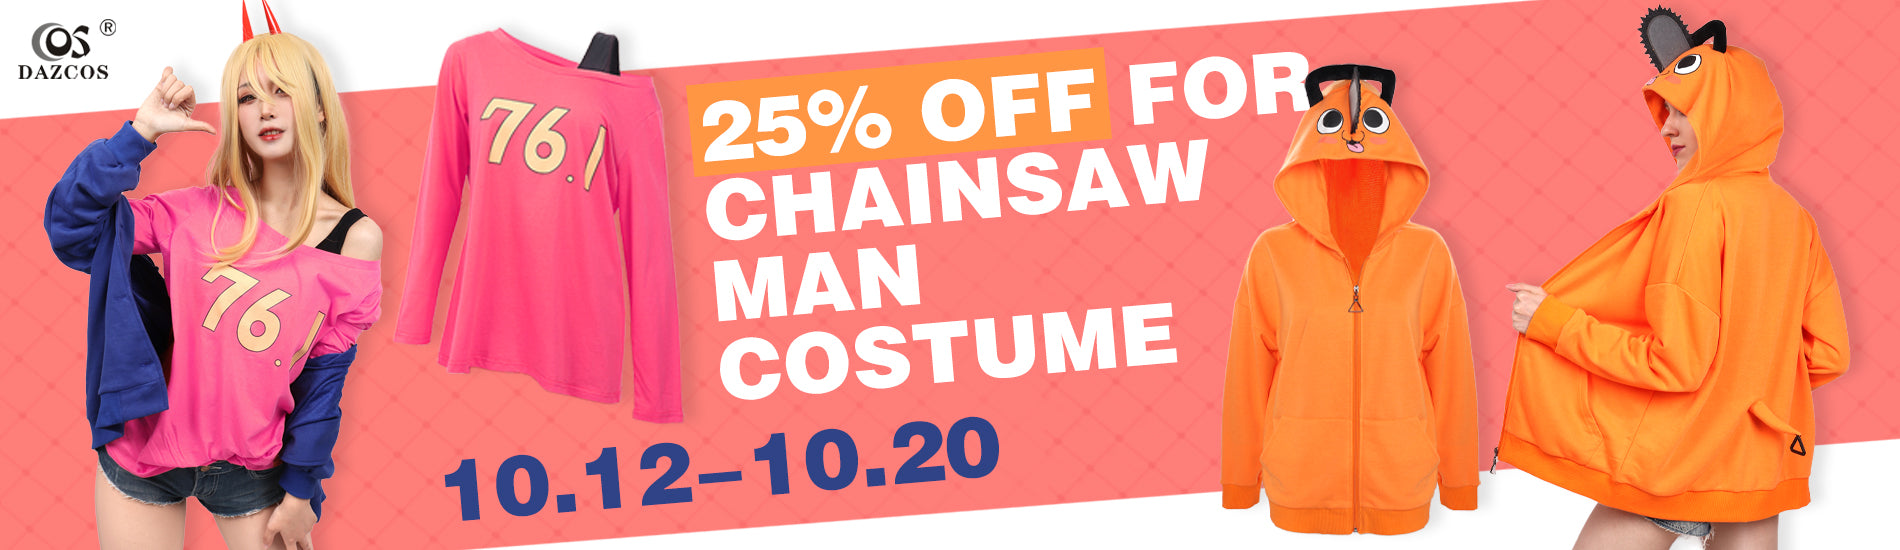 ChainSaw Man Costume Discount